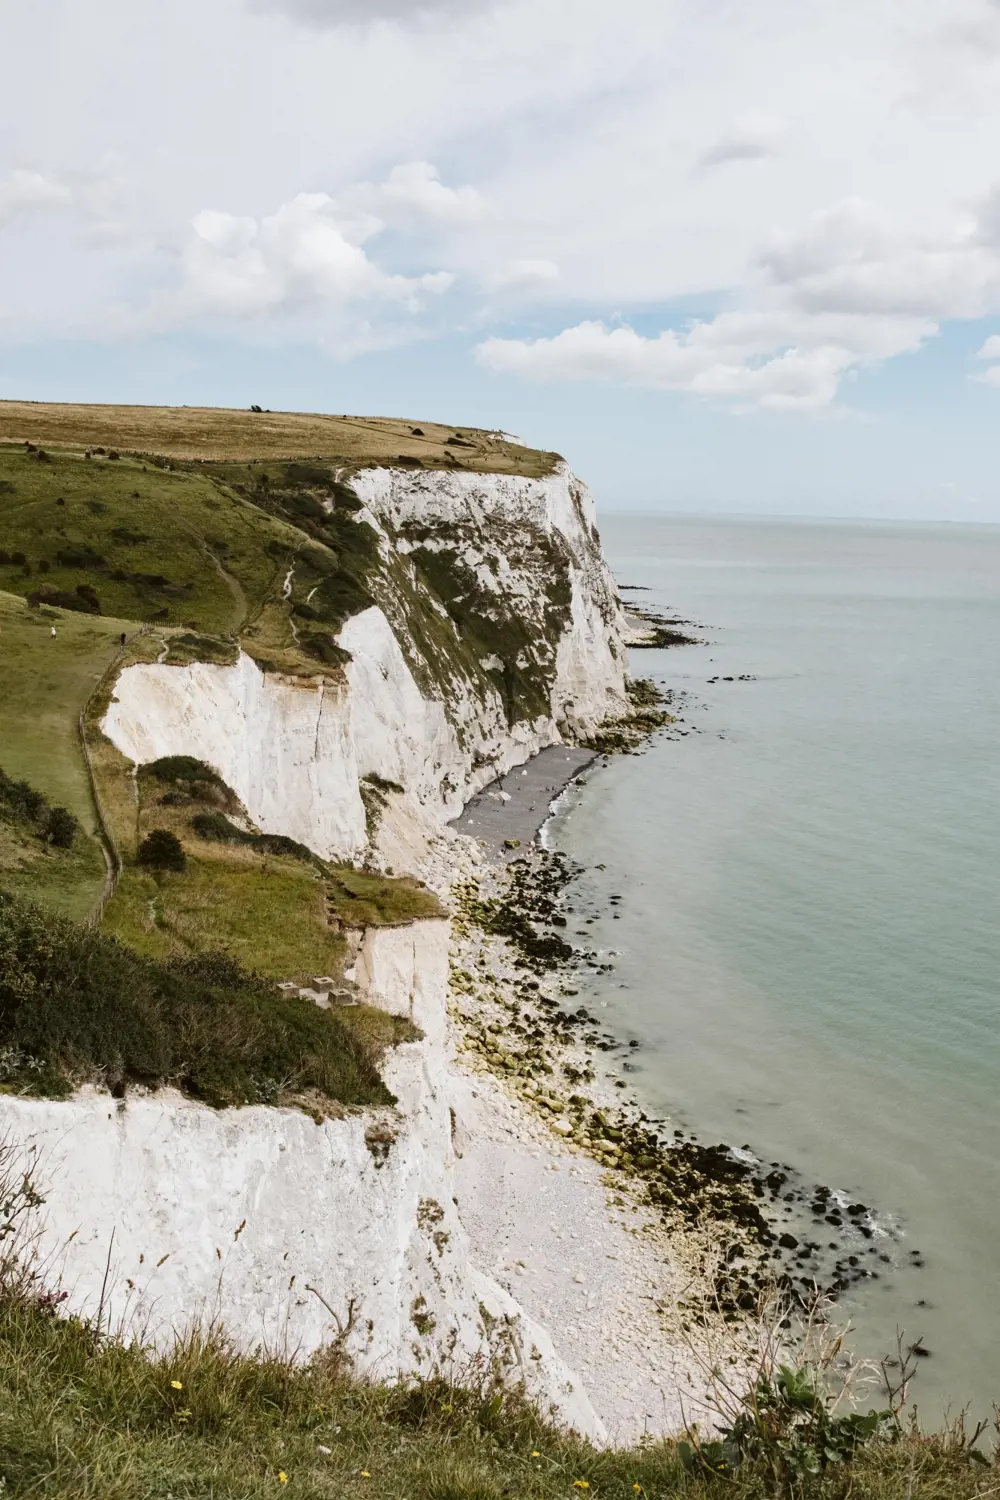 The white cliffs of Dover on a slightly overcast day.